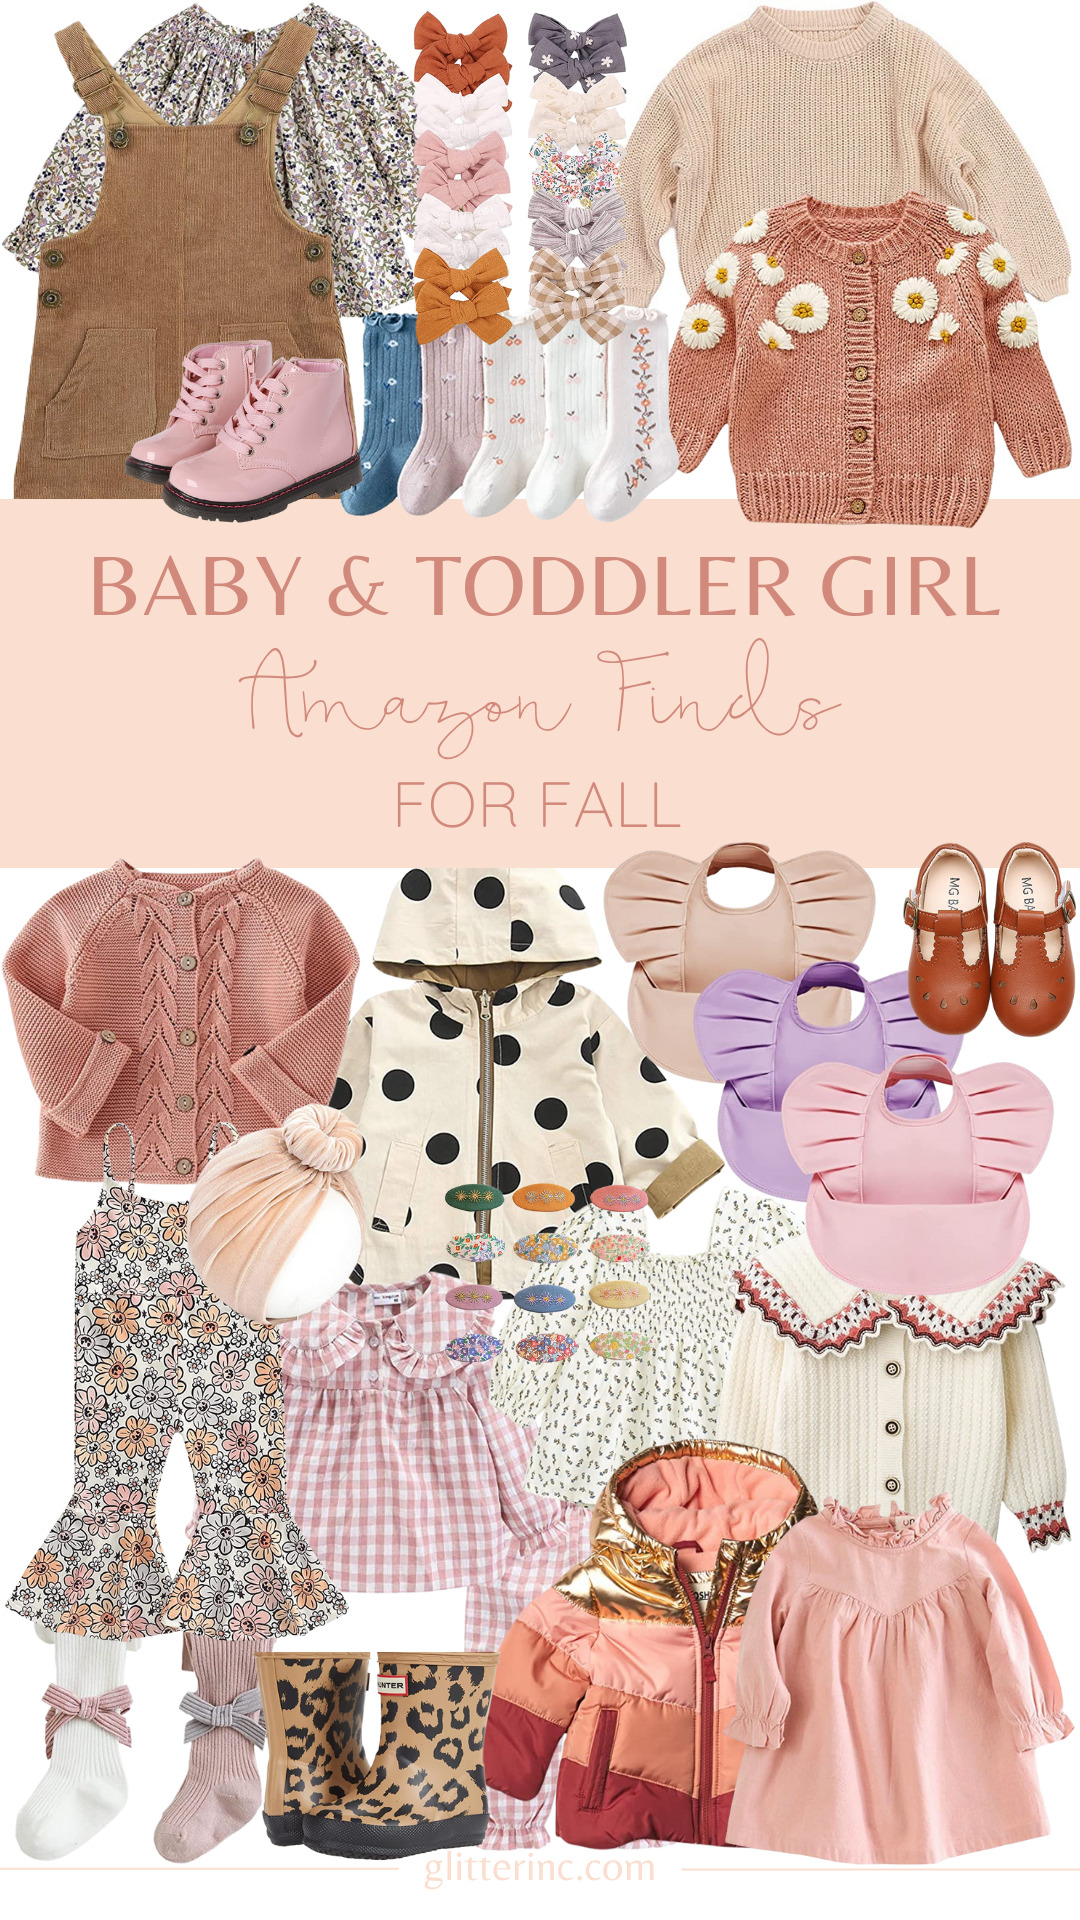 Baby and Toddler Girl Amazon Finds for Fall - GLITTERINC.COM